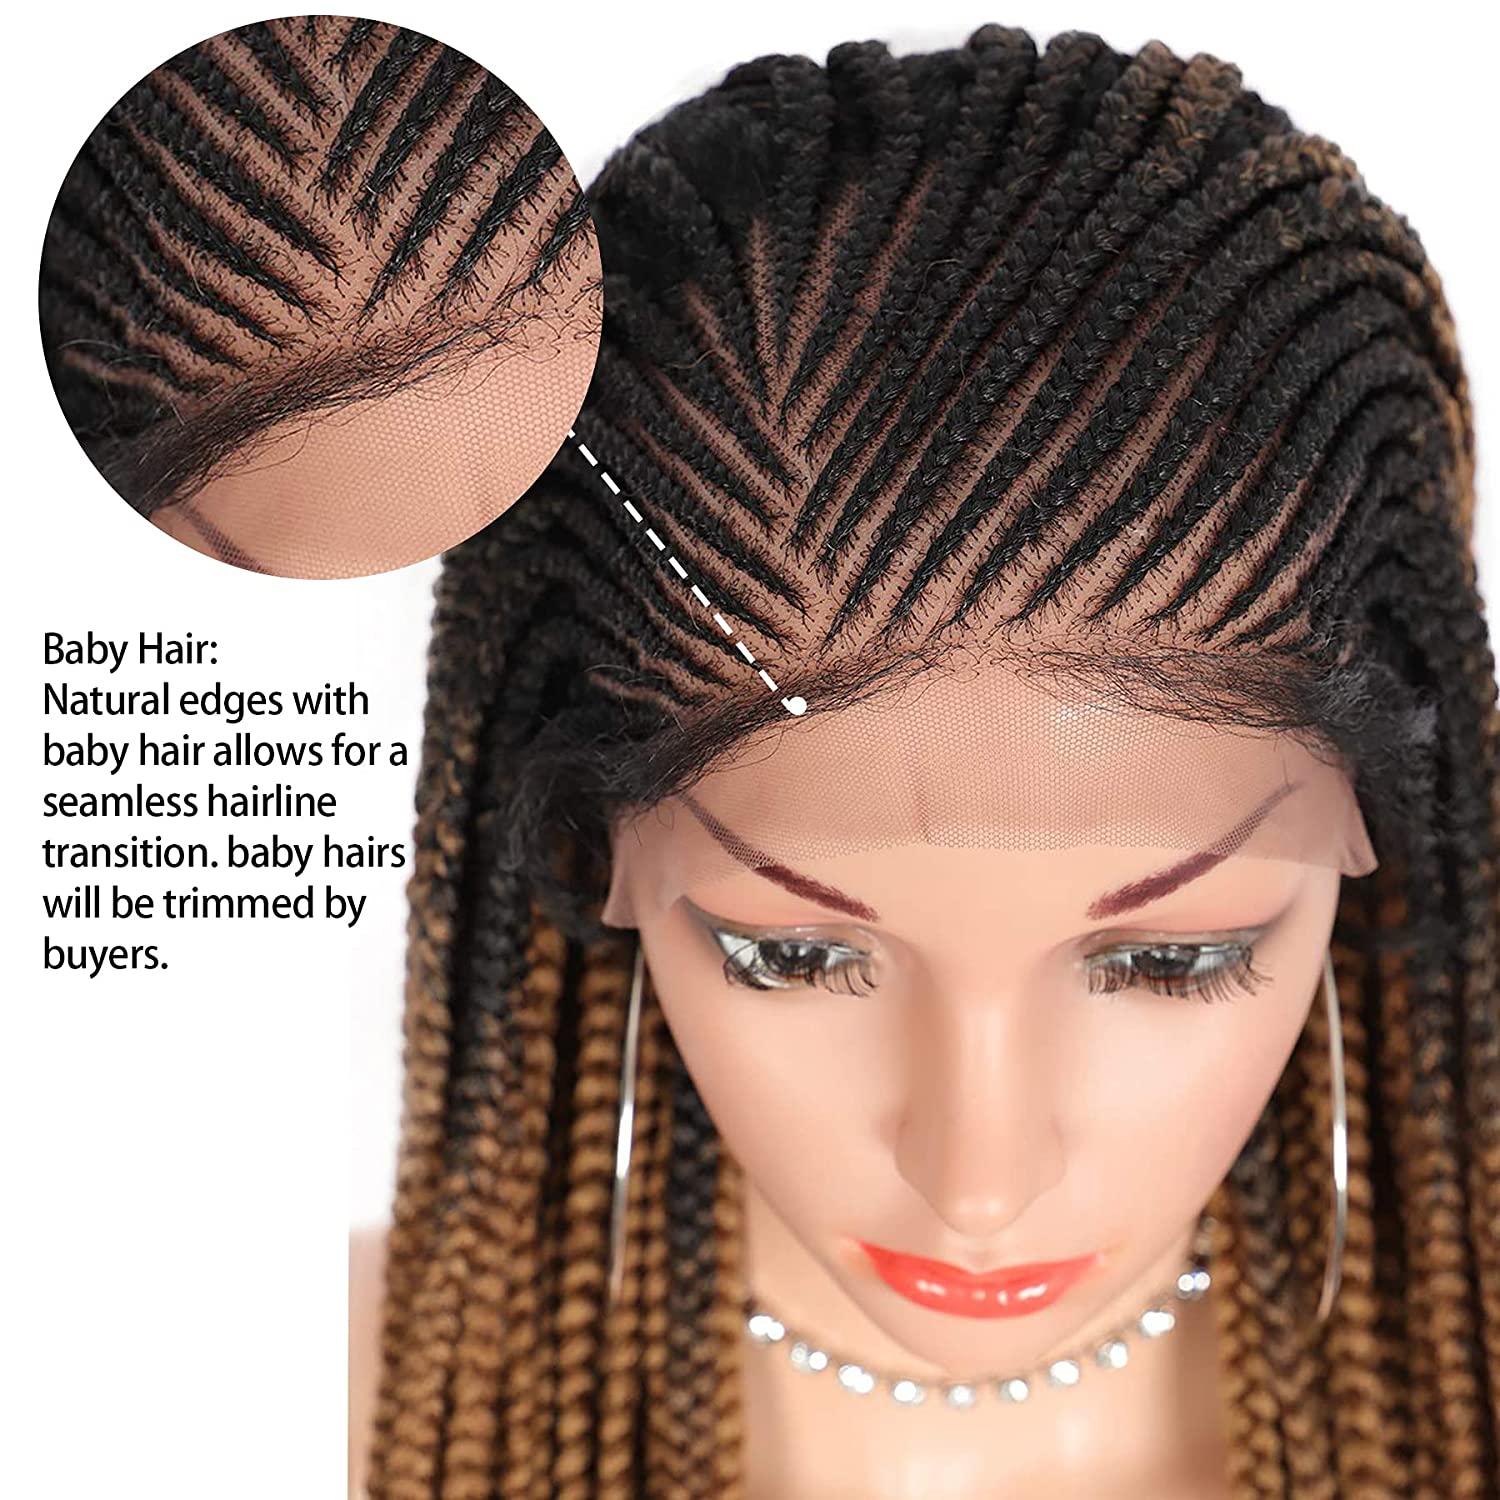 Kalyss 28 Hand-Braided 13X6 Lace Frontal Side Part Twist Braids Wigs with  Baby Hair for Black Women 100% kanekalon Ombre Black to Brown Synthetic  Lightweight Hand-Tied Lace Front Box Braided Wig